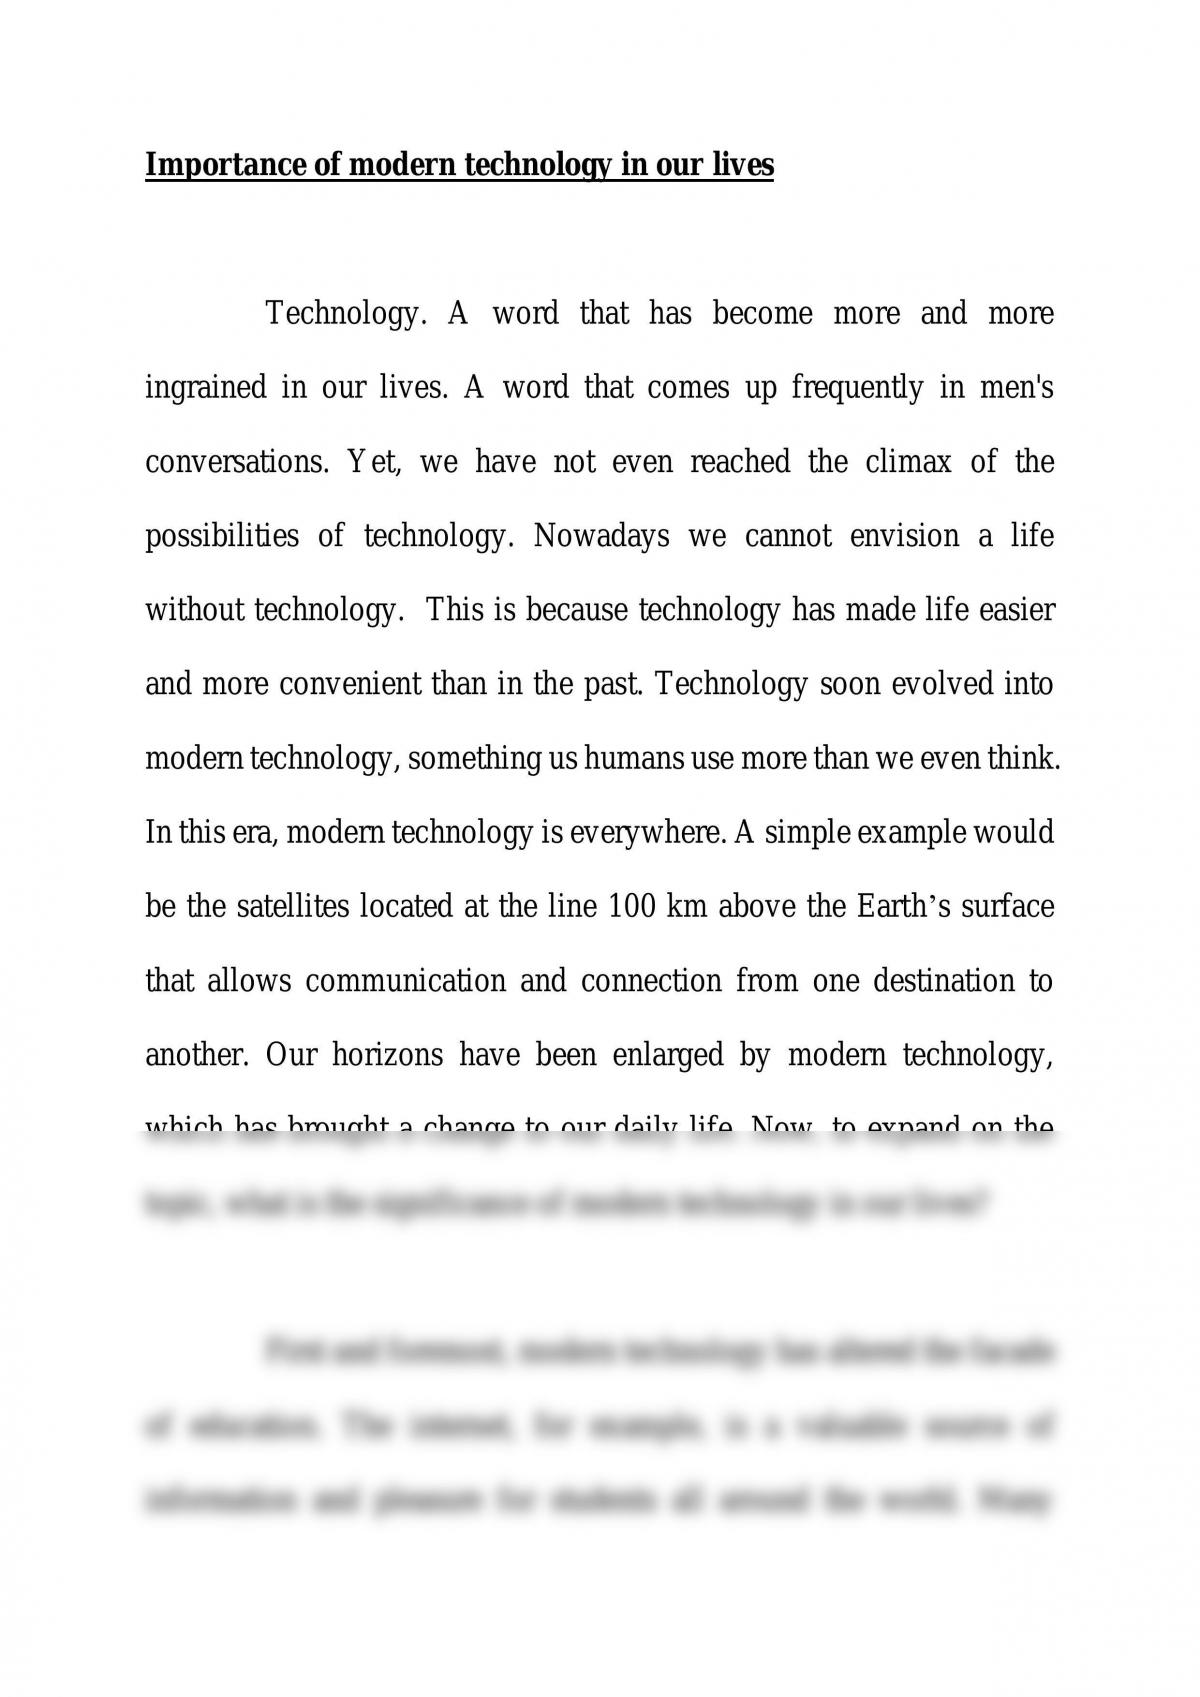 the role of information technology in modern age essay